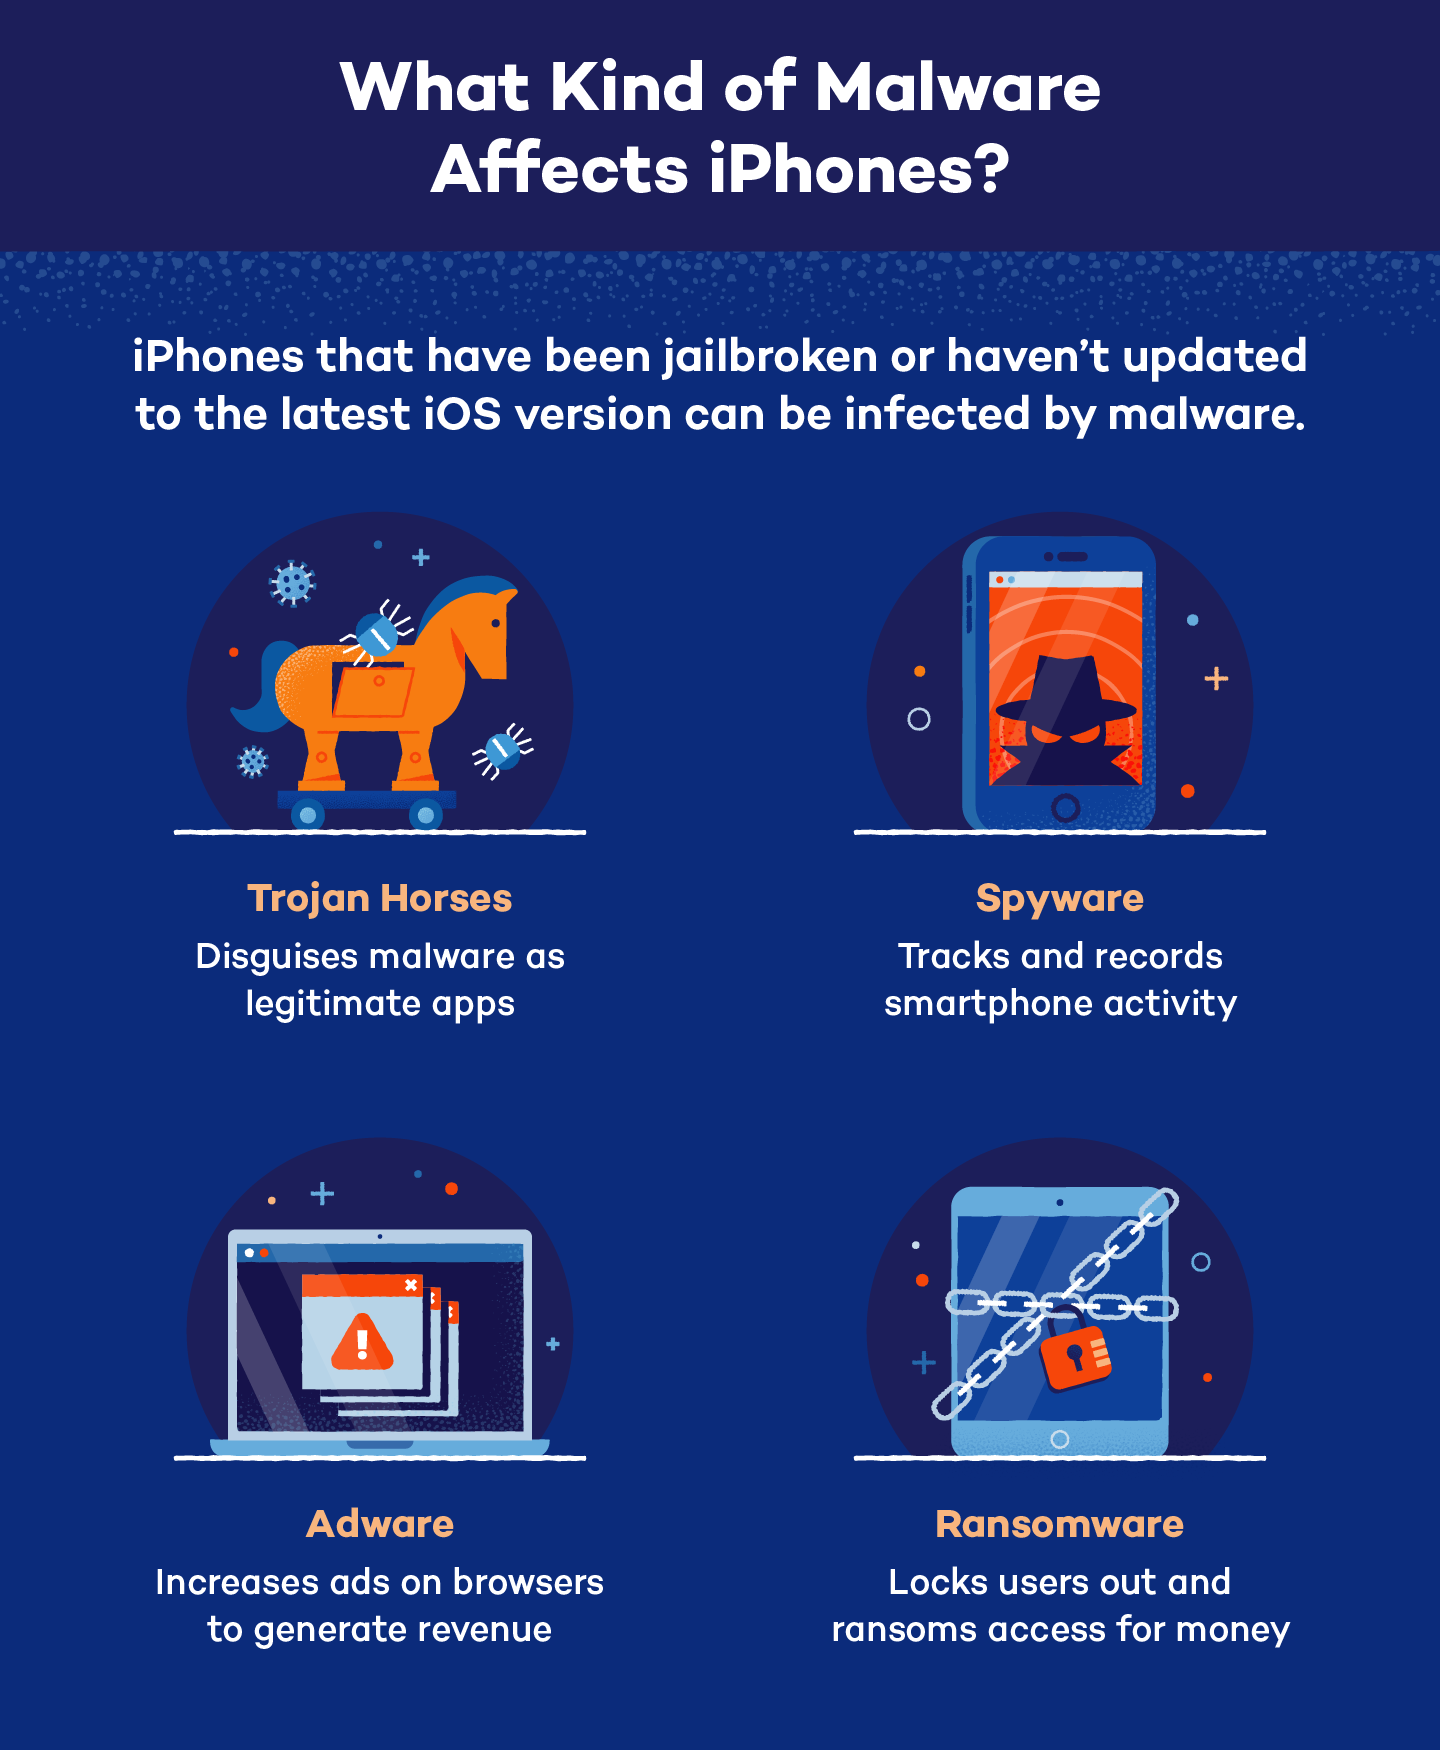 Illustration of trojan horses, spyware, adware and ransomeware affecting iPhones. 